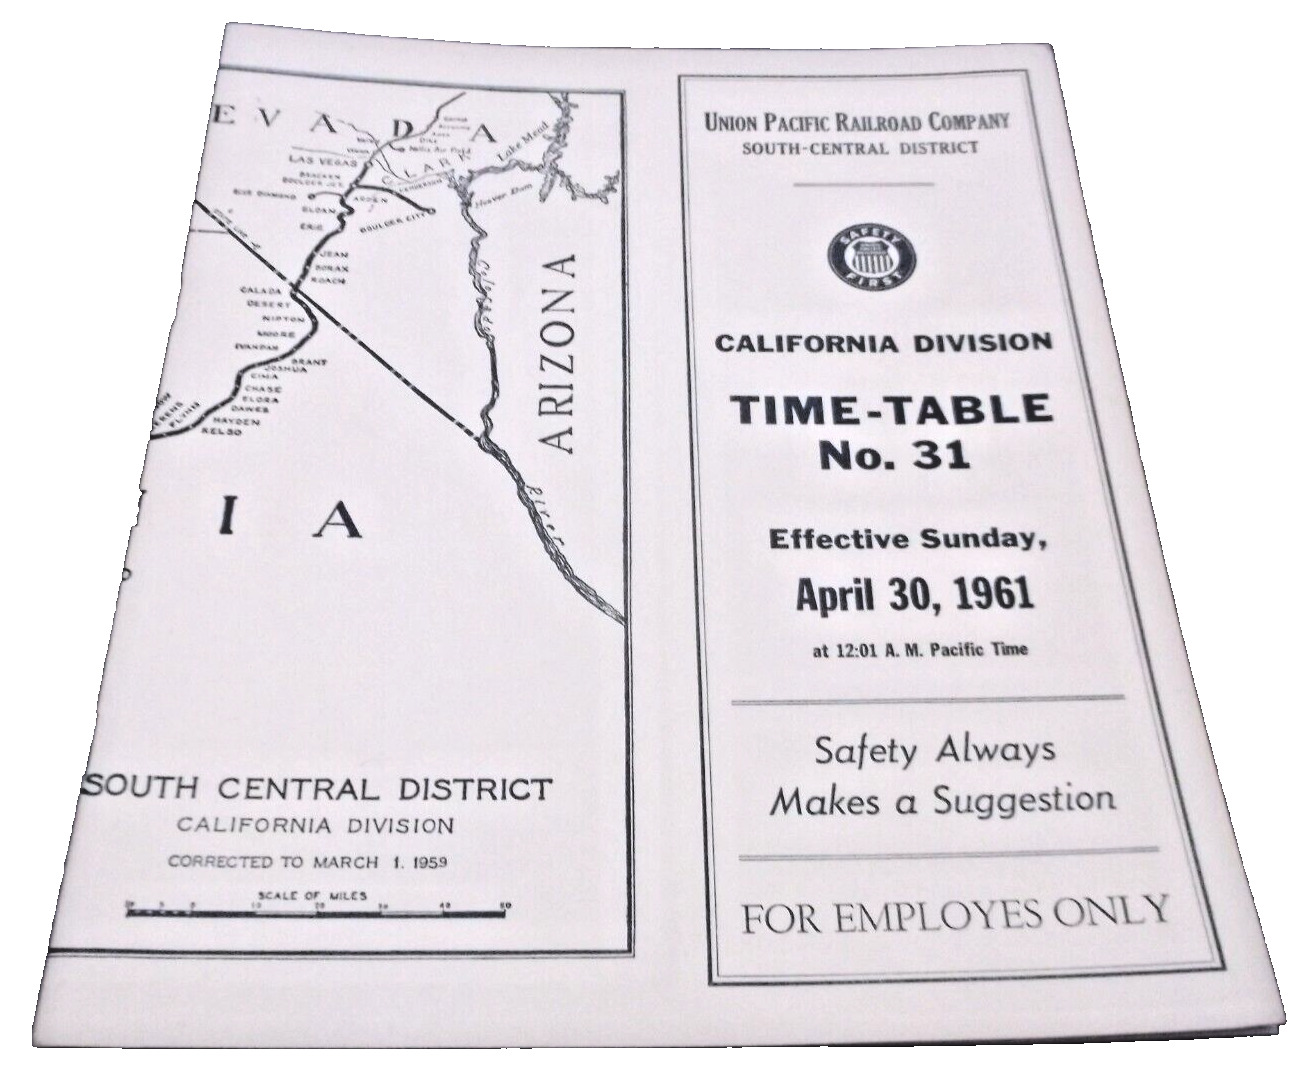 APRIL 1961 UNION PACIFIC CALIFORNIA DIVISION EMPLOYEE TIMETABLE #31